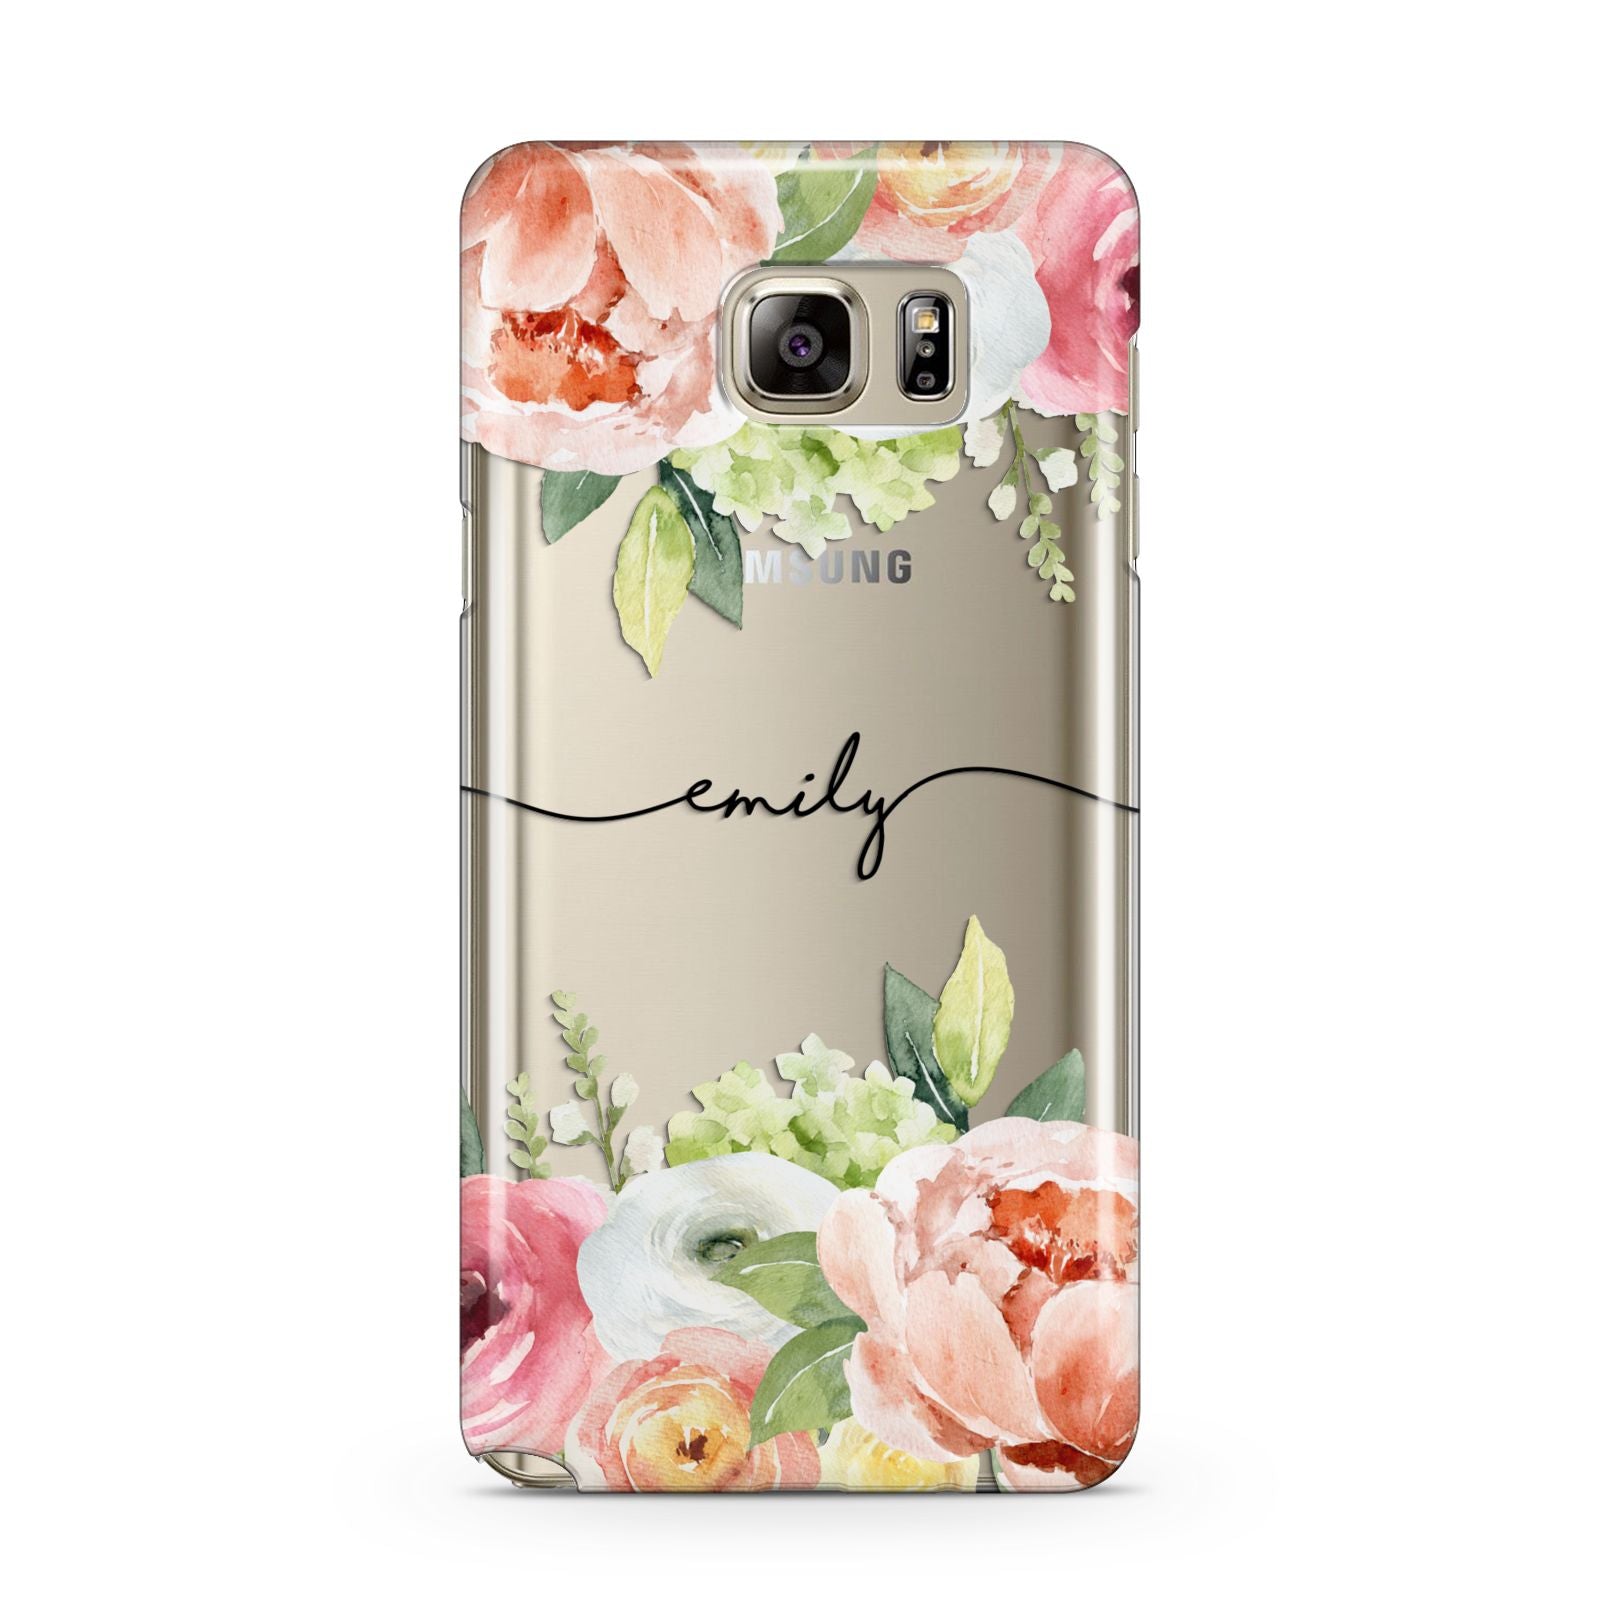 Personalised Flowers Samsung Galaxy Note 5 Case